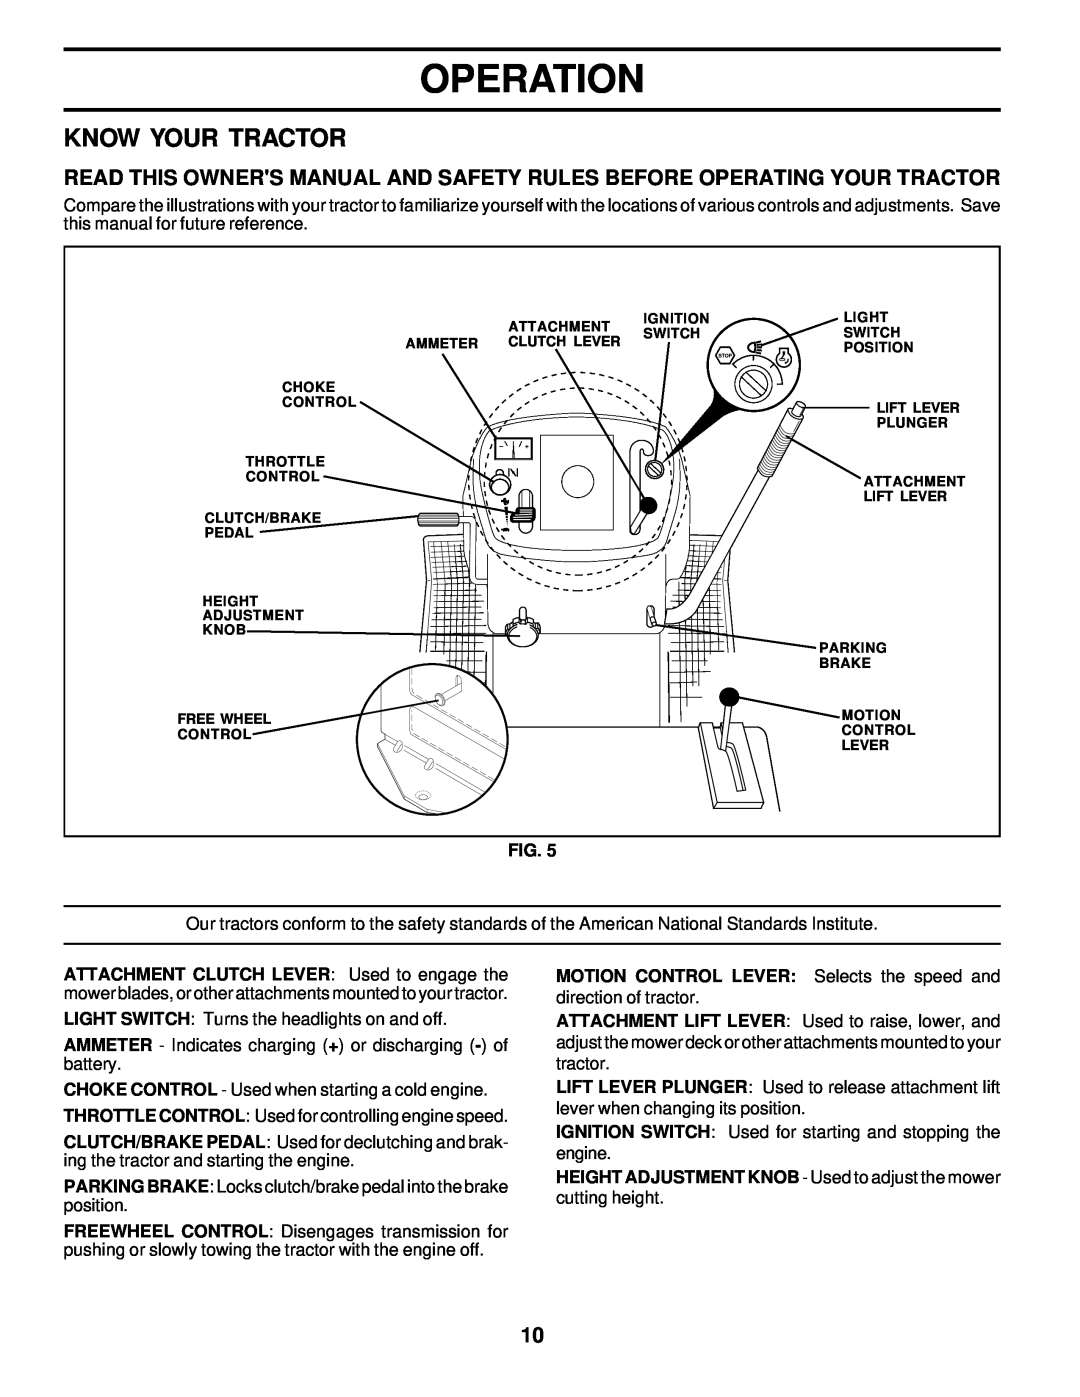 Poulan 178087 owner manual Know Your Tractor, Operation, MOTION CONTROL LEVER Selects the speed and 